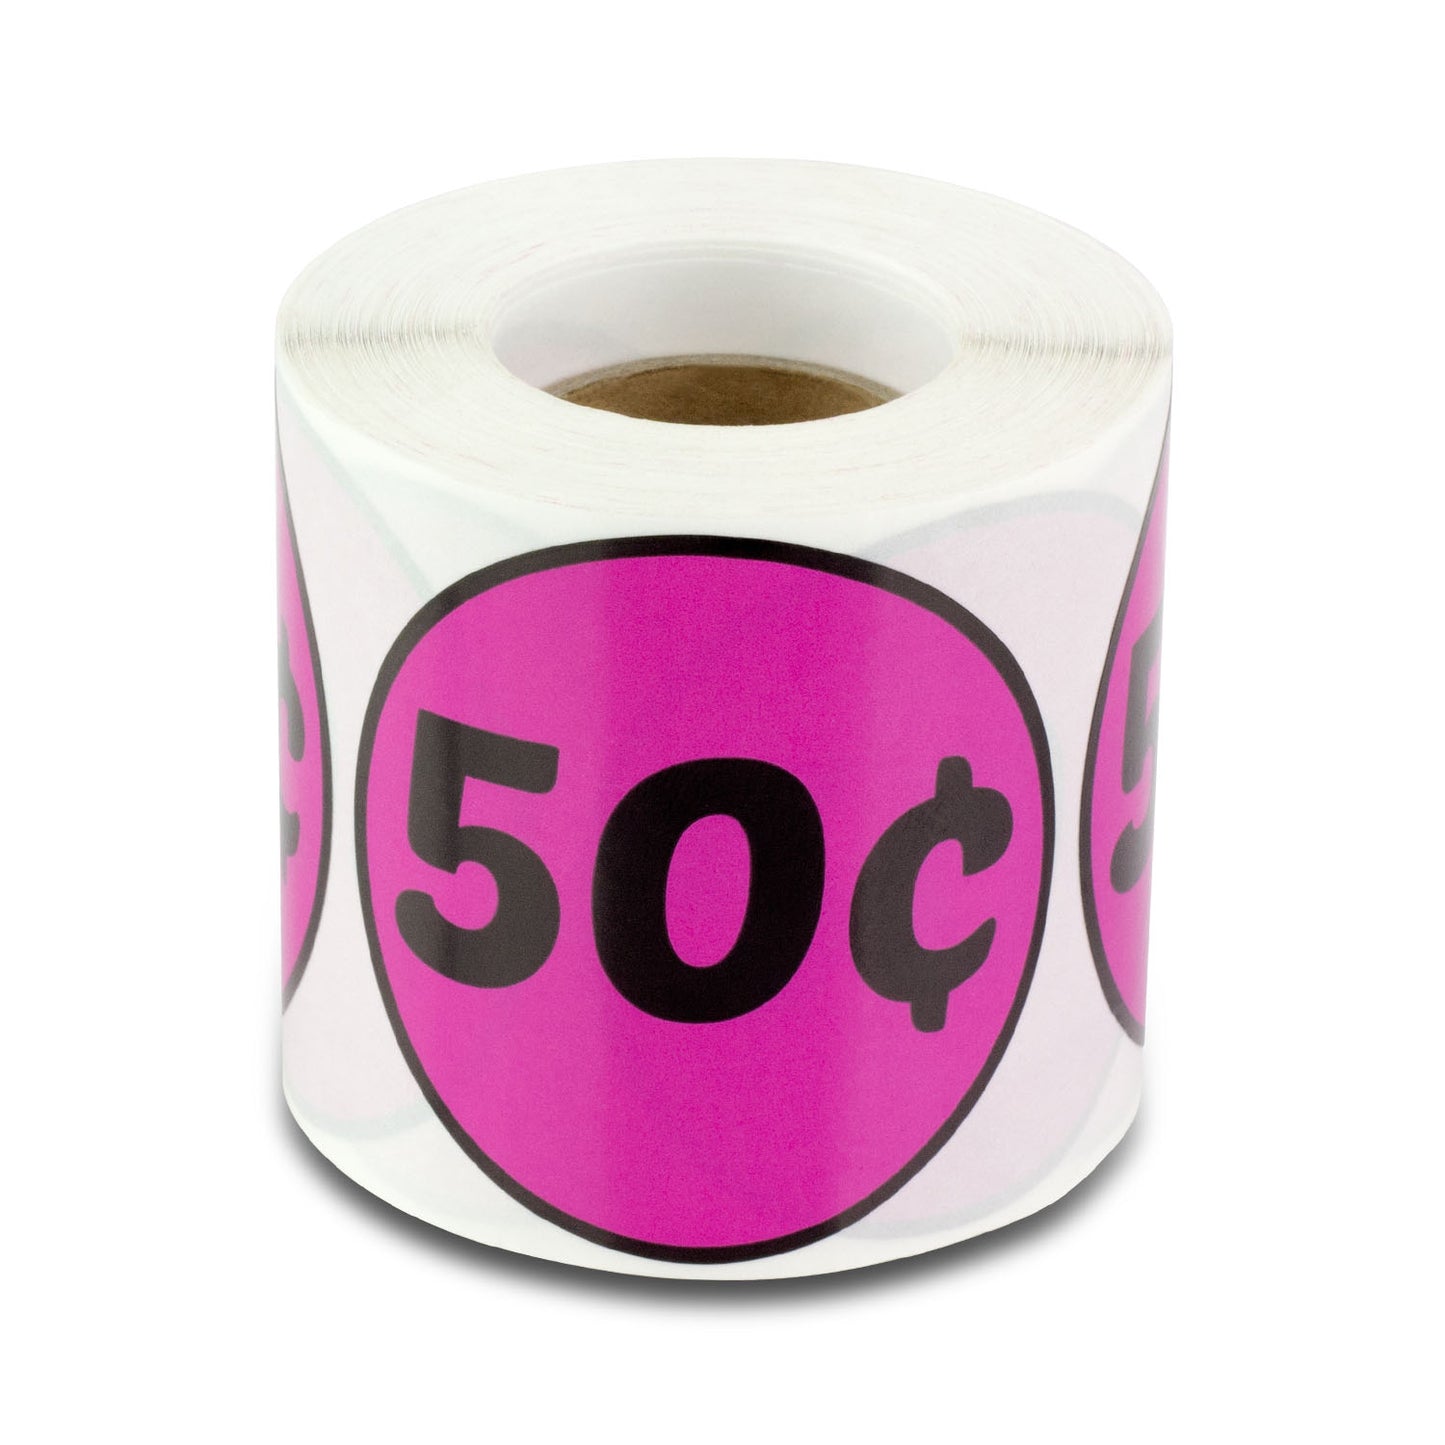 2 inch | Retail & Sales:  50 Cent Stickers / ¢50 Cent Price Stickers